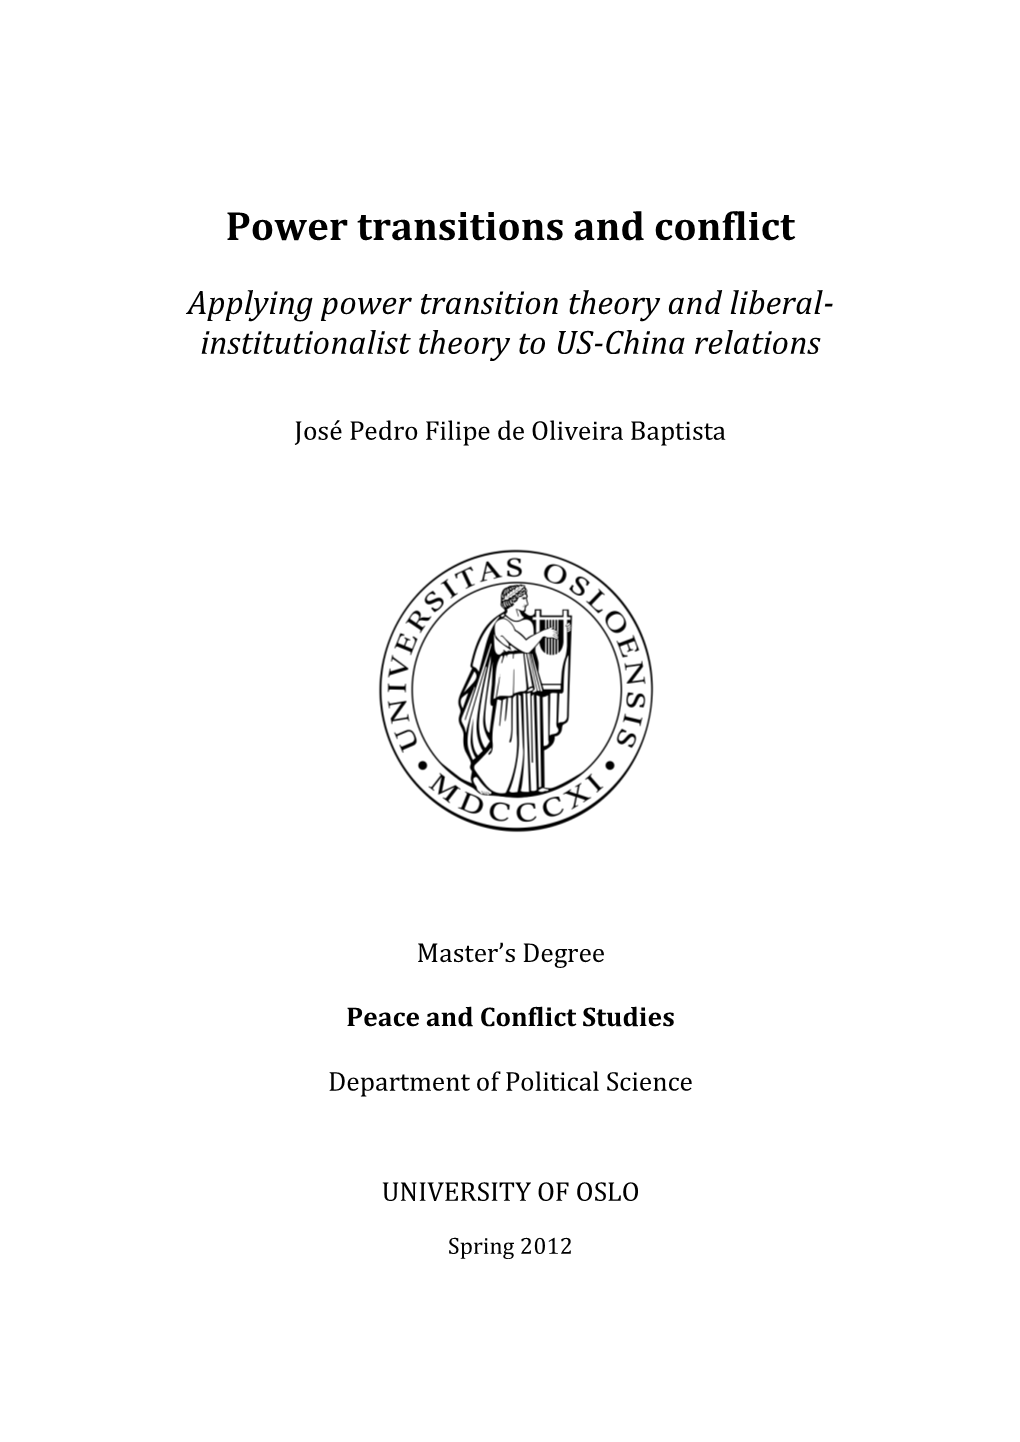 Power Transitions and Conflict